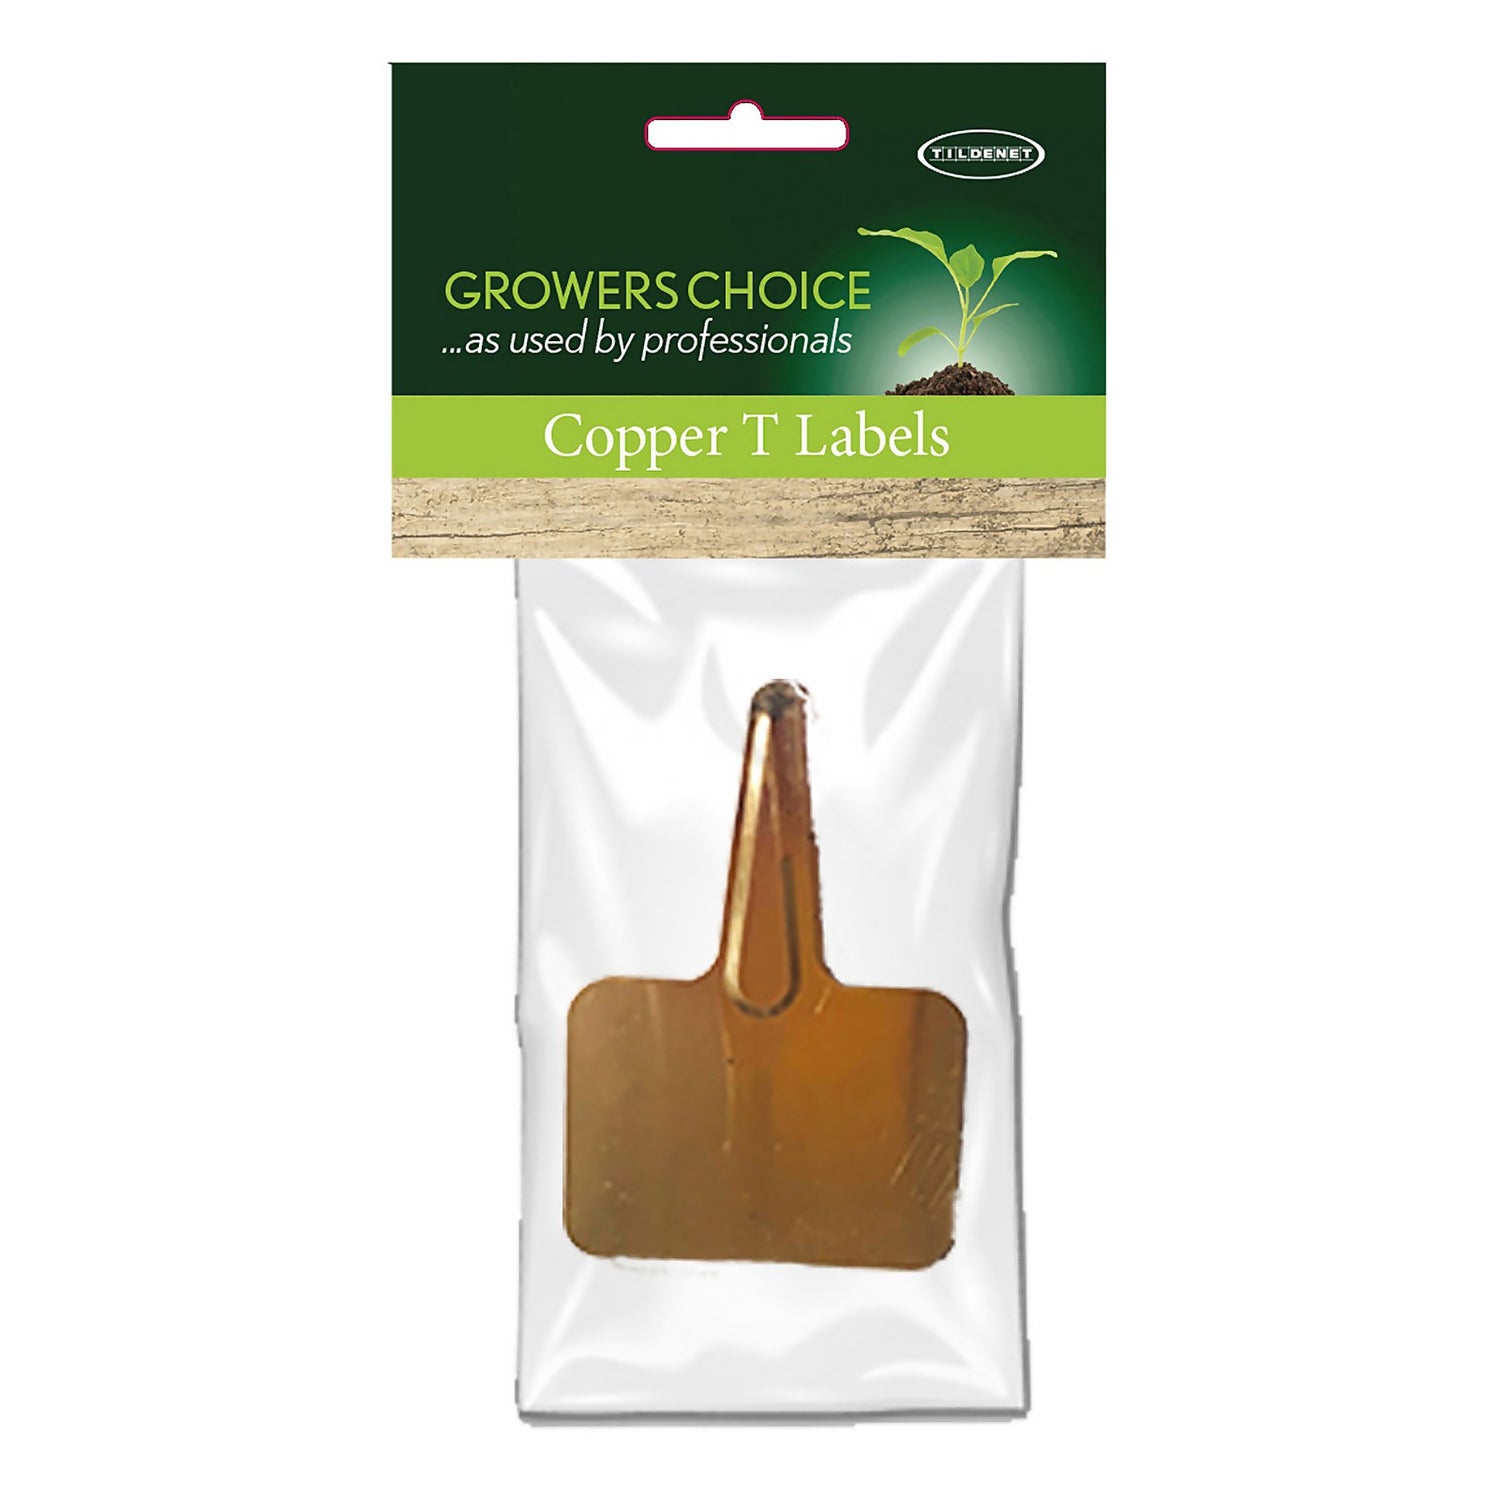 Growers Choice Copper T Labels x 10